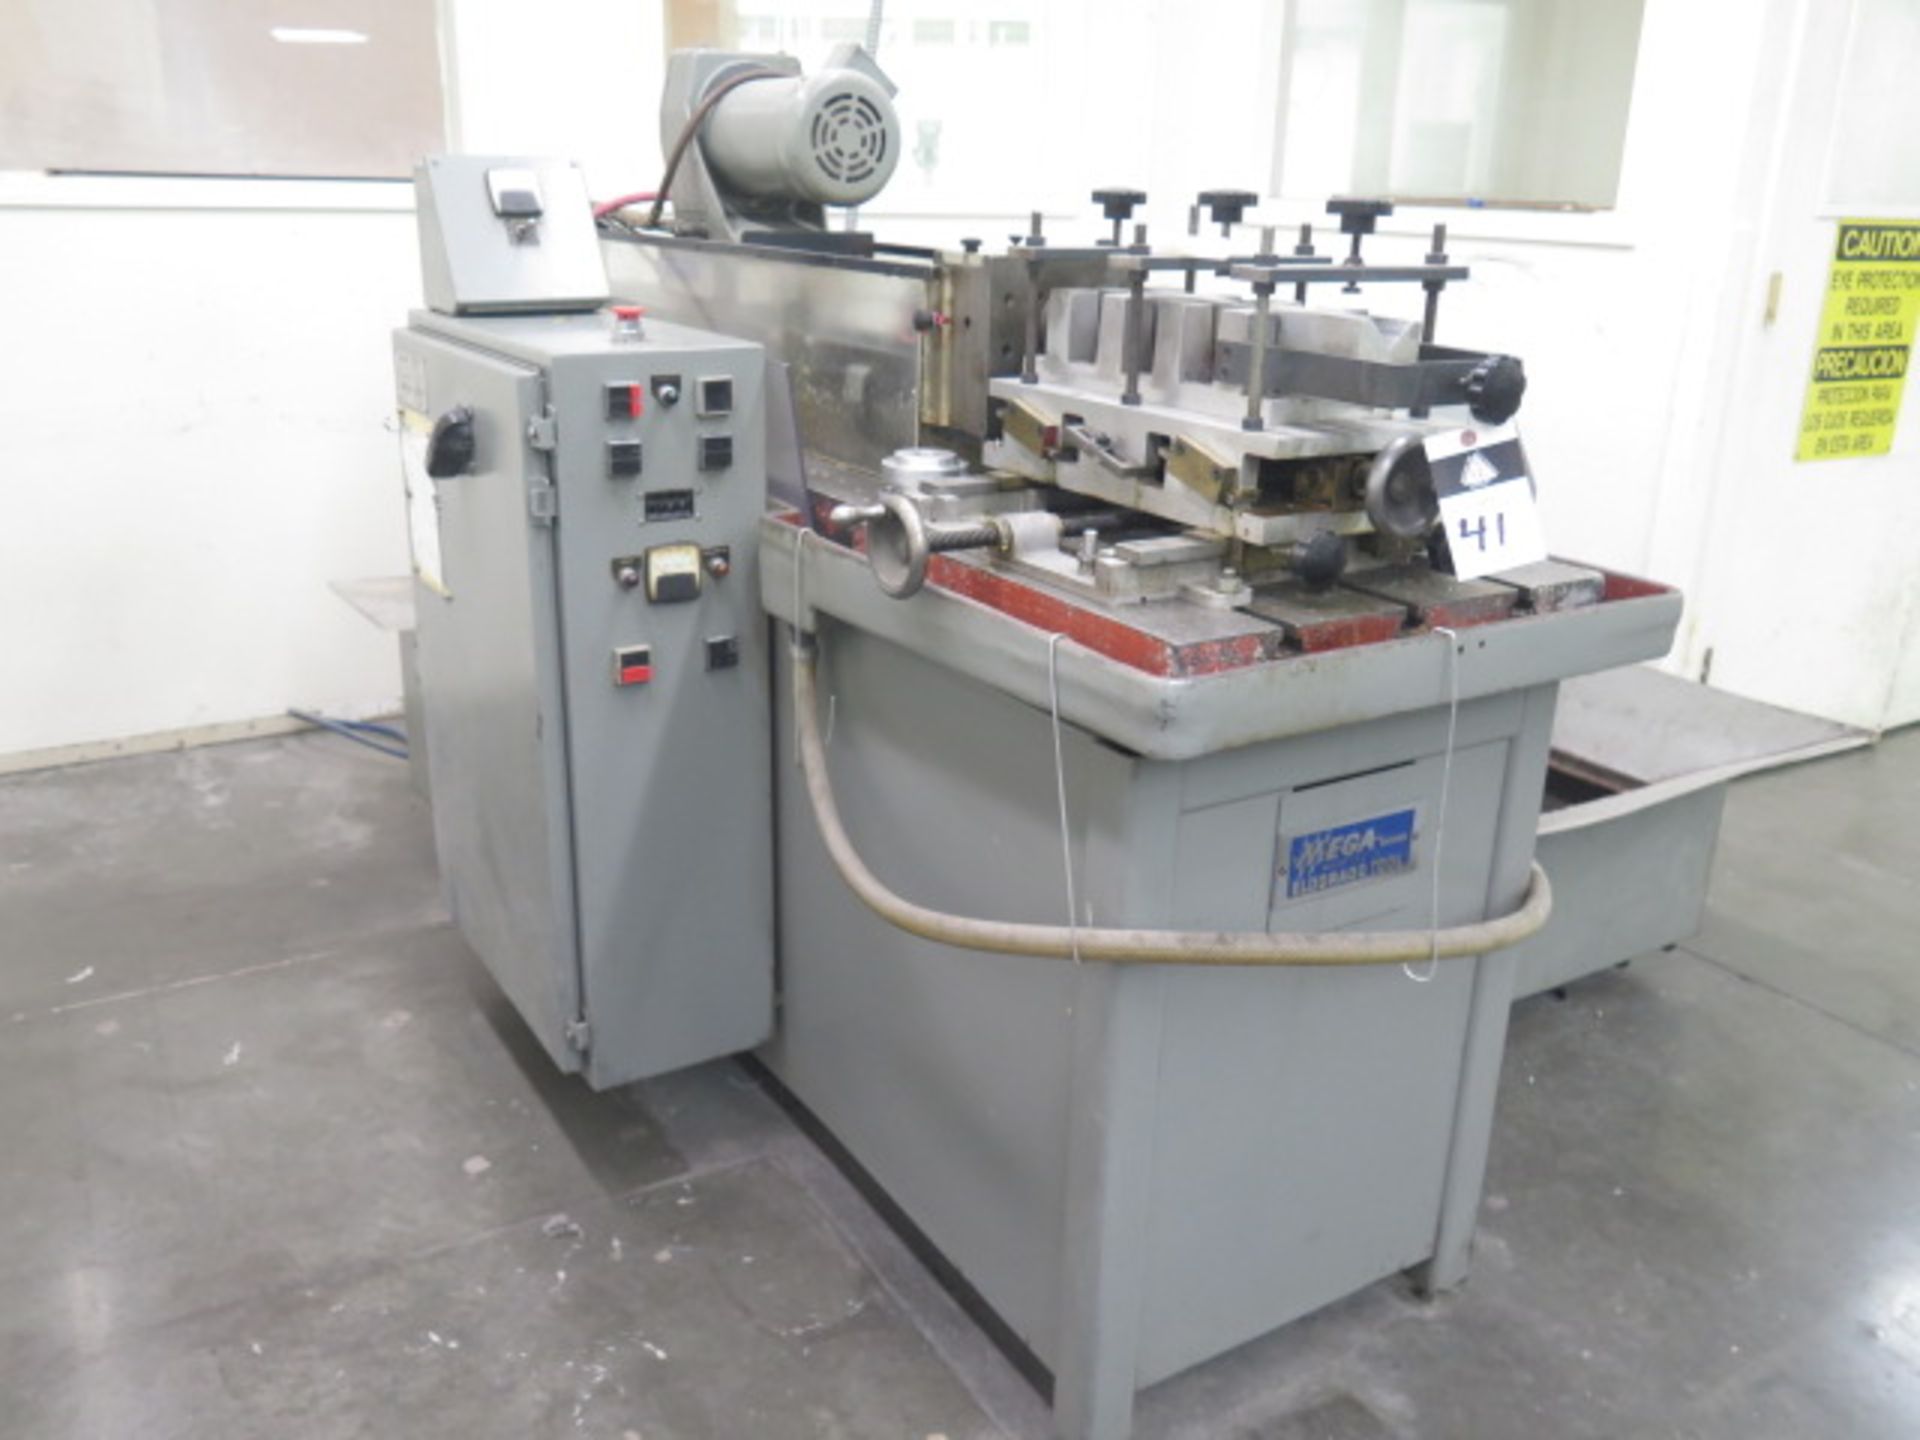 Mega Eldorado M75 1041 Gun Drilling Machine s/n 693 w/ Coolant and Filtration System SOLD AS-IS - Image 2 of 11